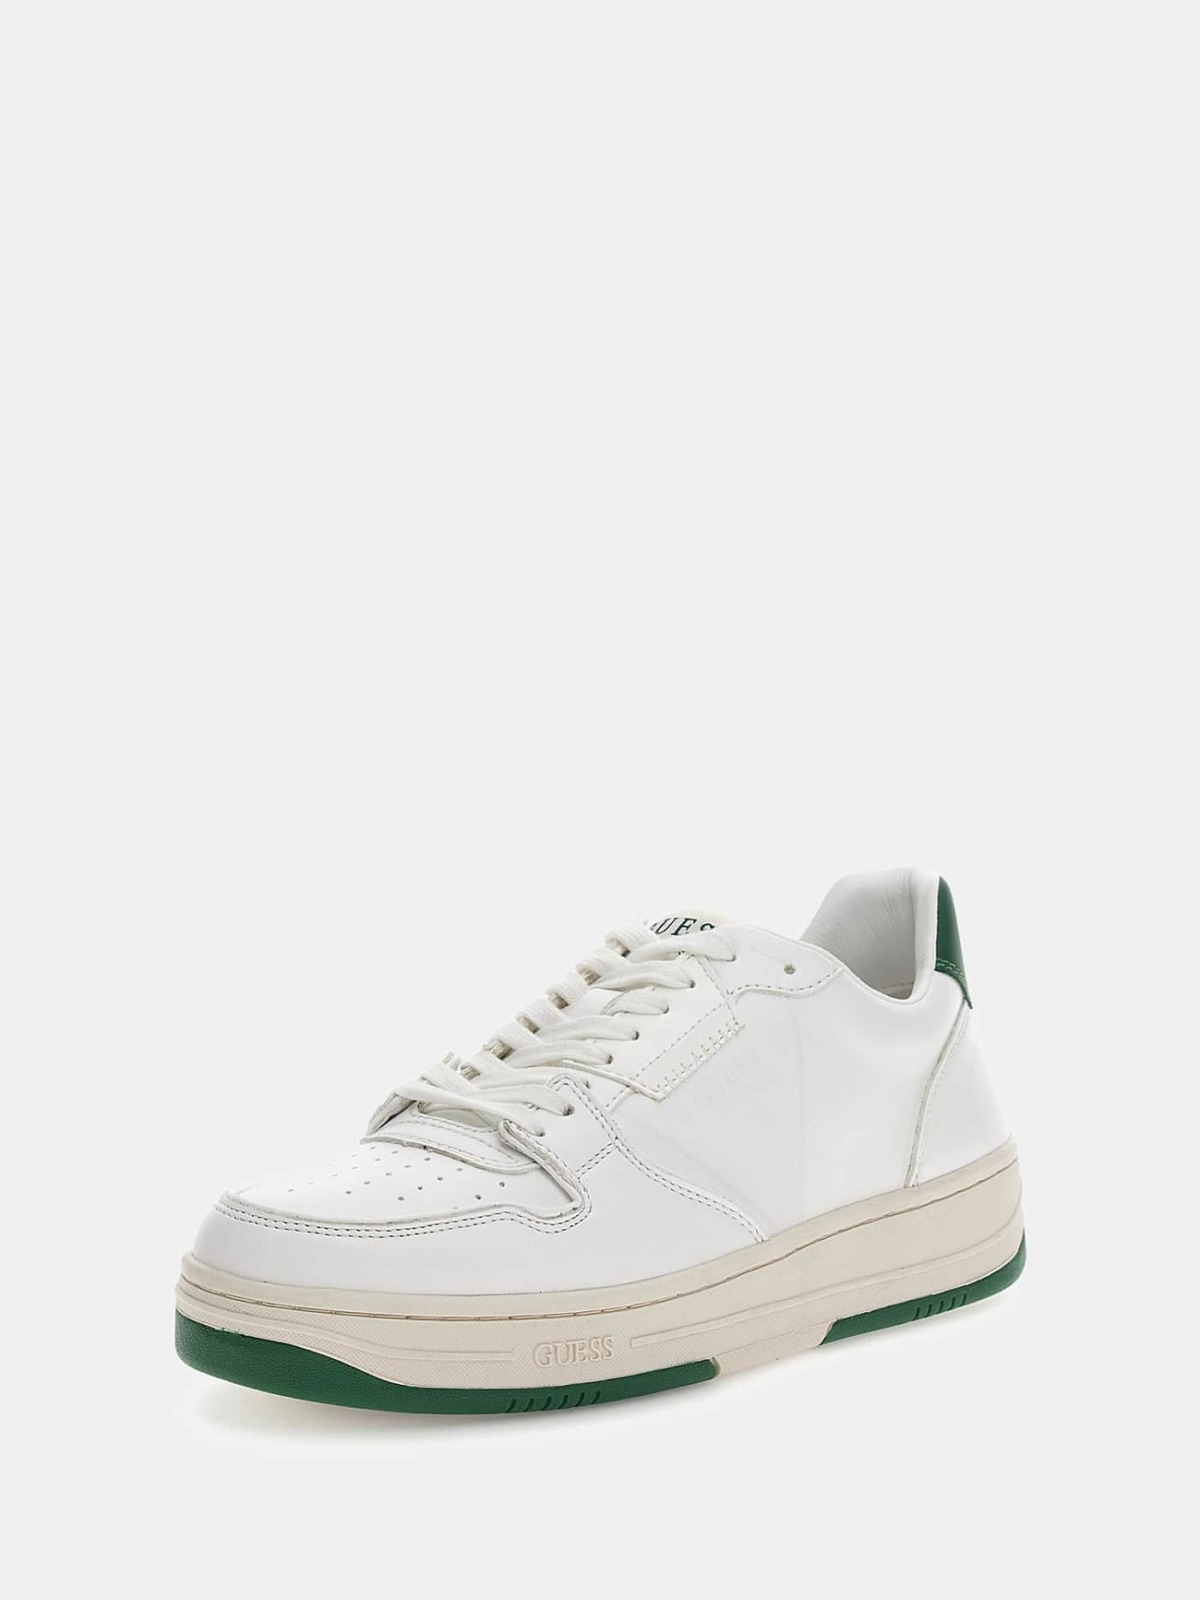 Guess - Men Sneakers in White GOOFASH